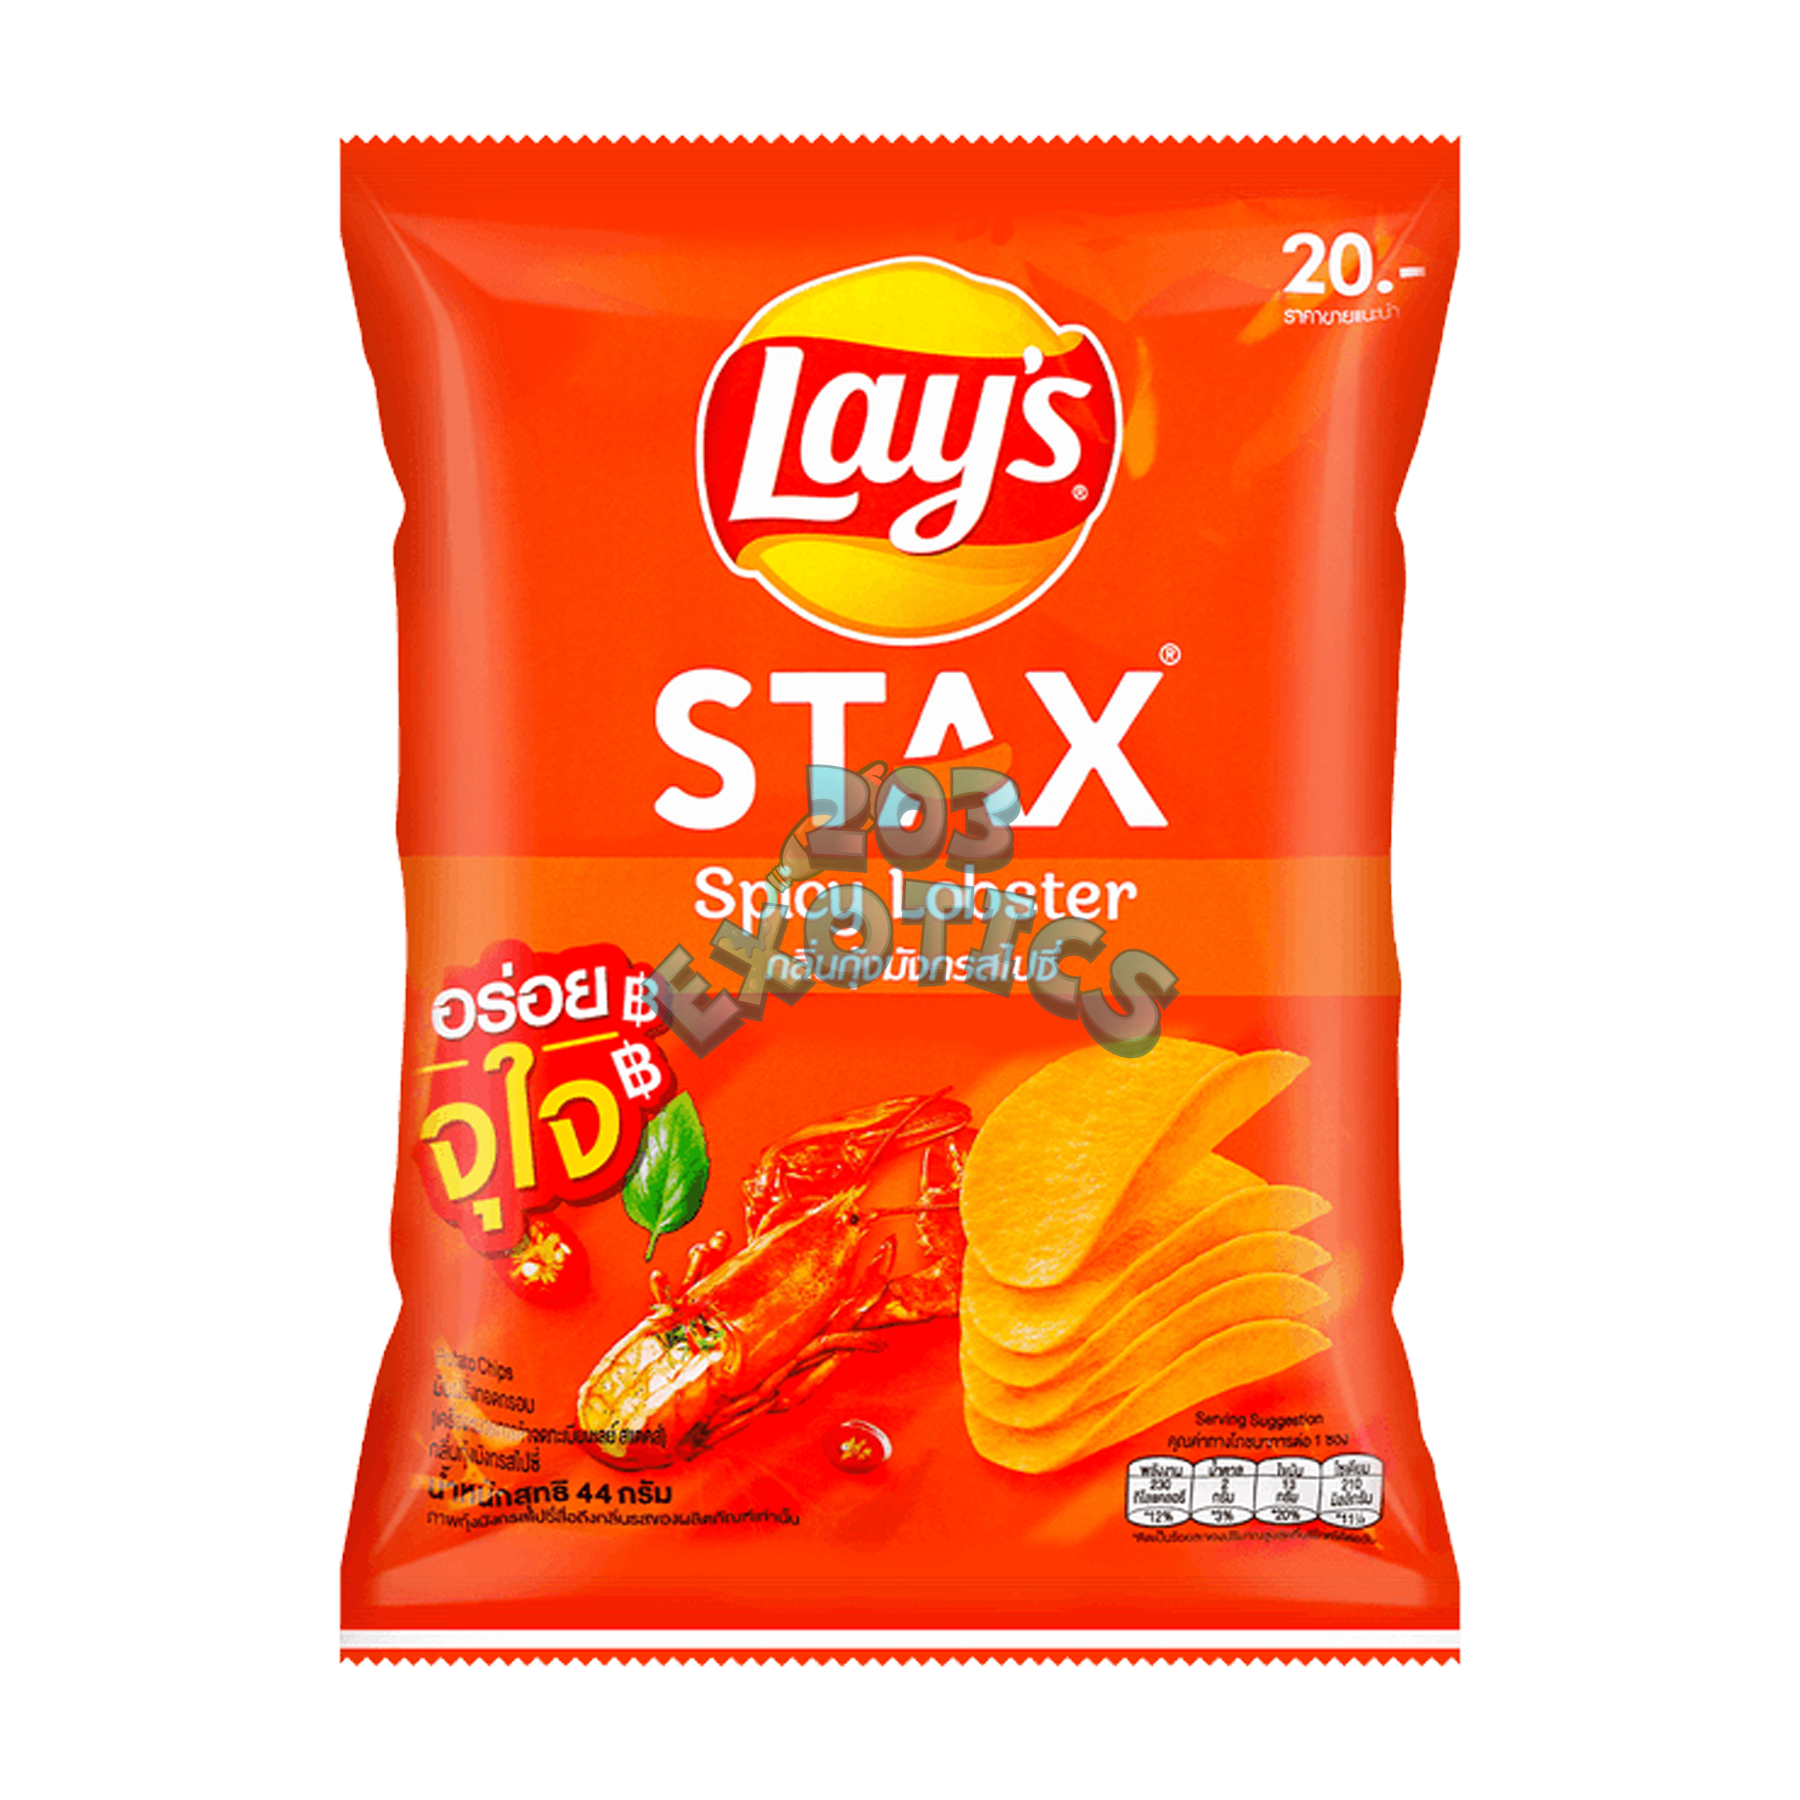 Lays Stax Spicy Lobster Flavored Chips